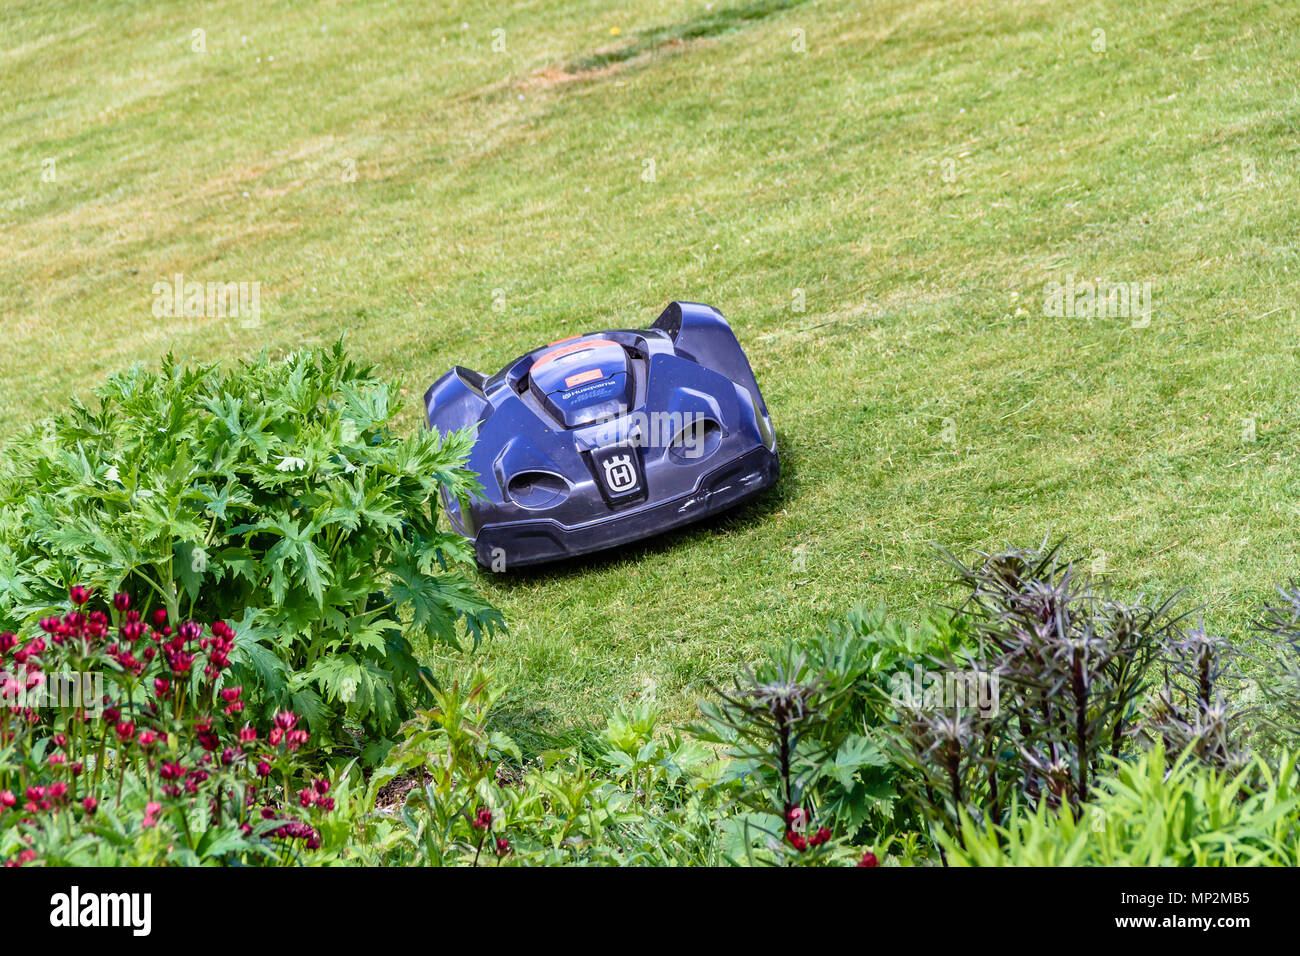 Husquarvna robot lawn mower on a sloping mowed lawn by a flower border, May 2018. Stock Photo